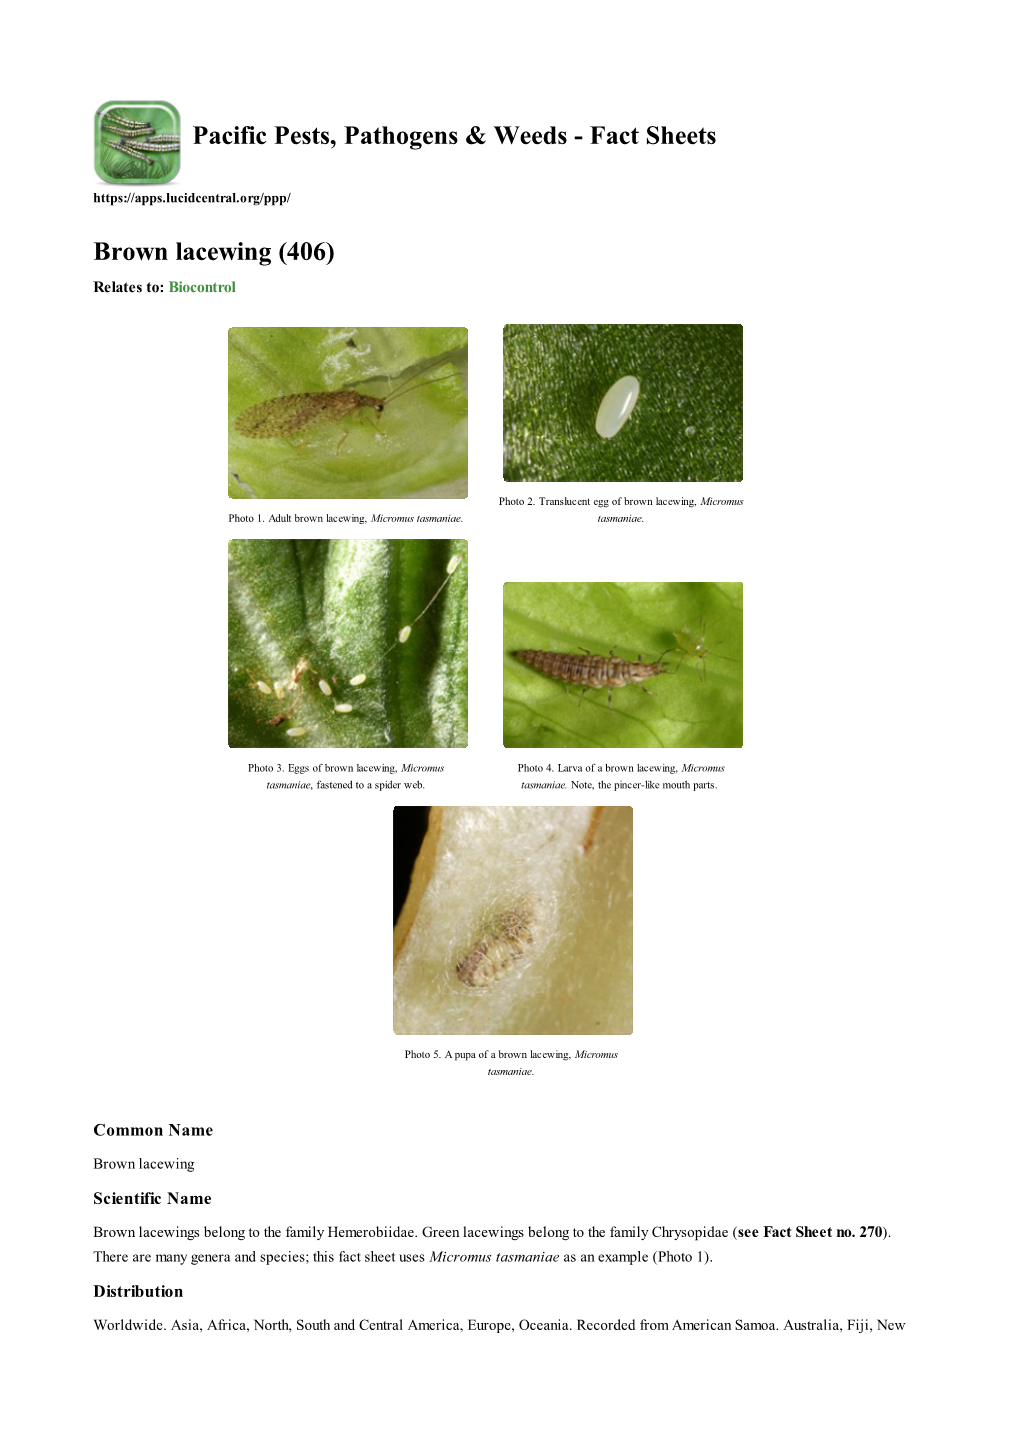 Brown Lacewing (406) Relates To: Biocontrol